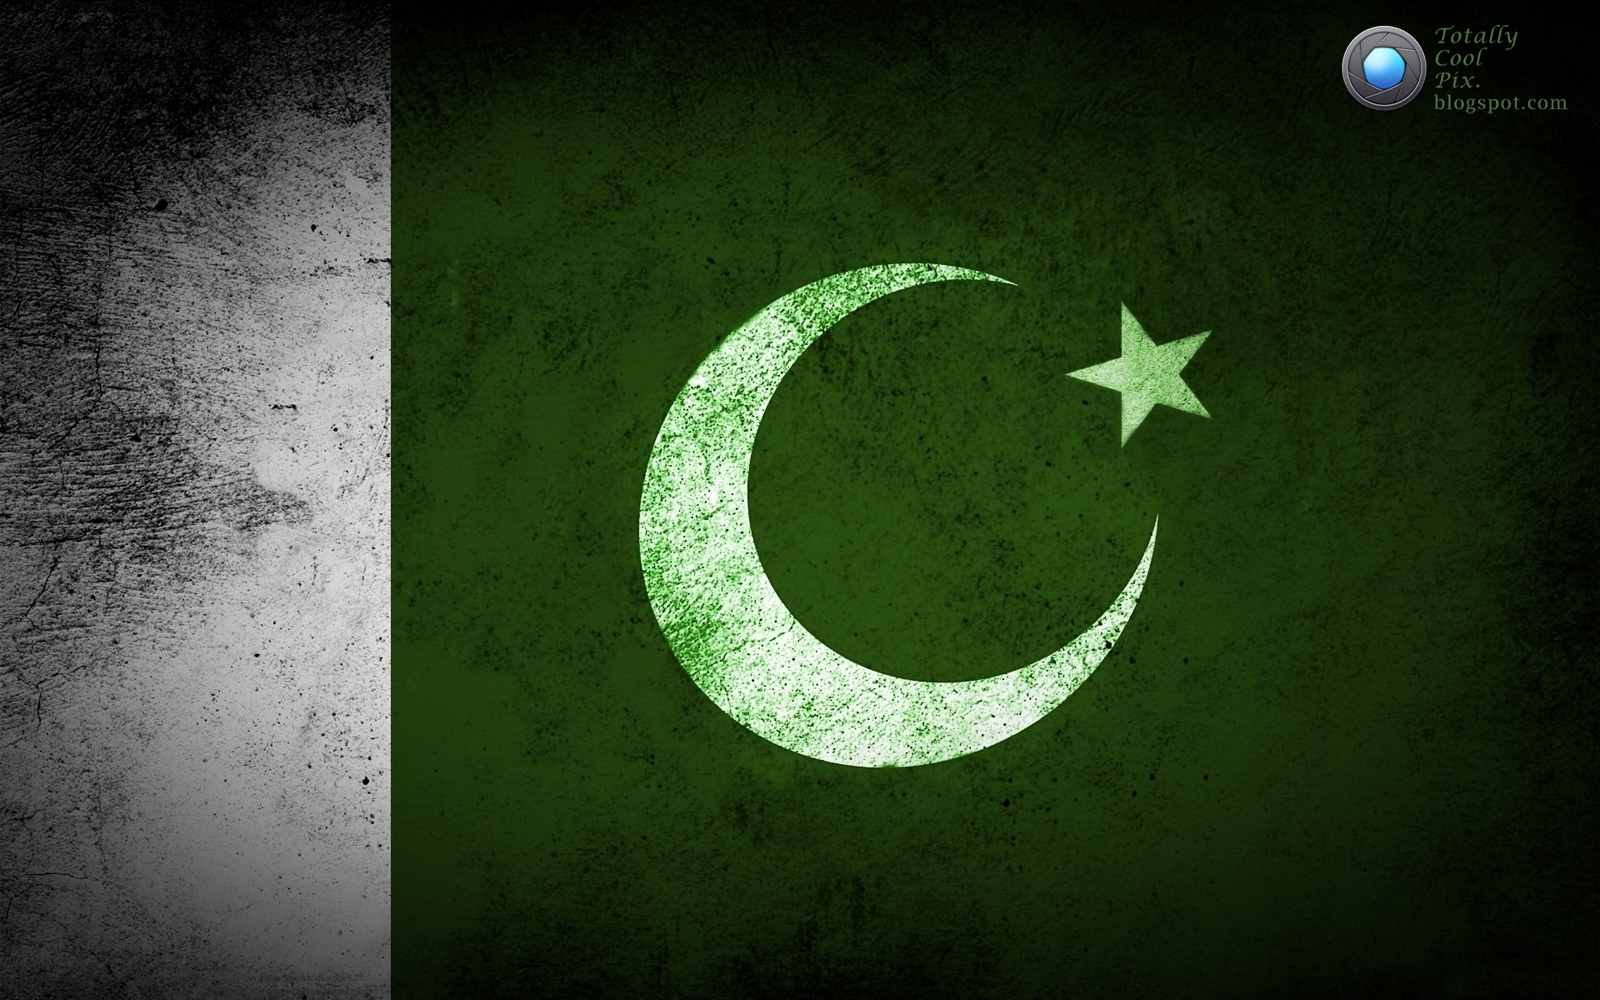 Of Pakistan Hd Wallpaper And Greeting Card 30 Grunge Flagjpg